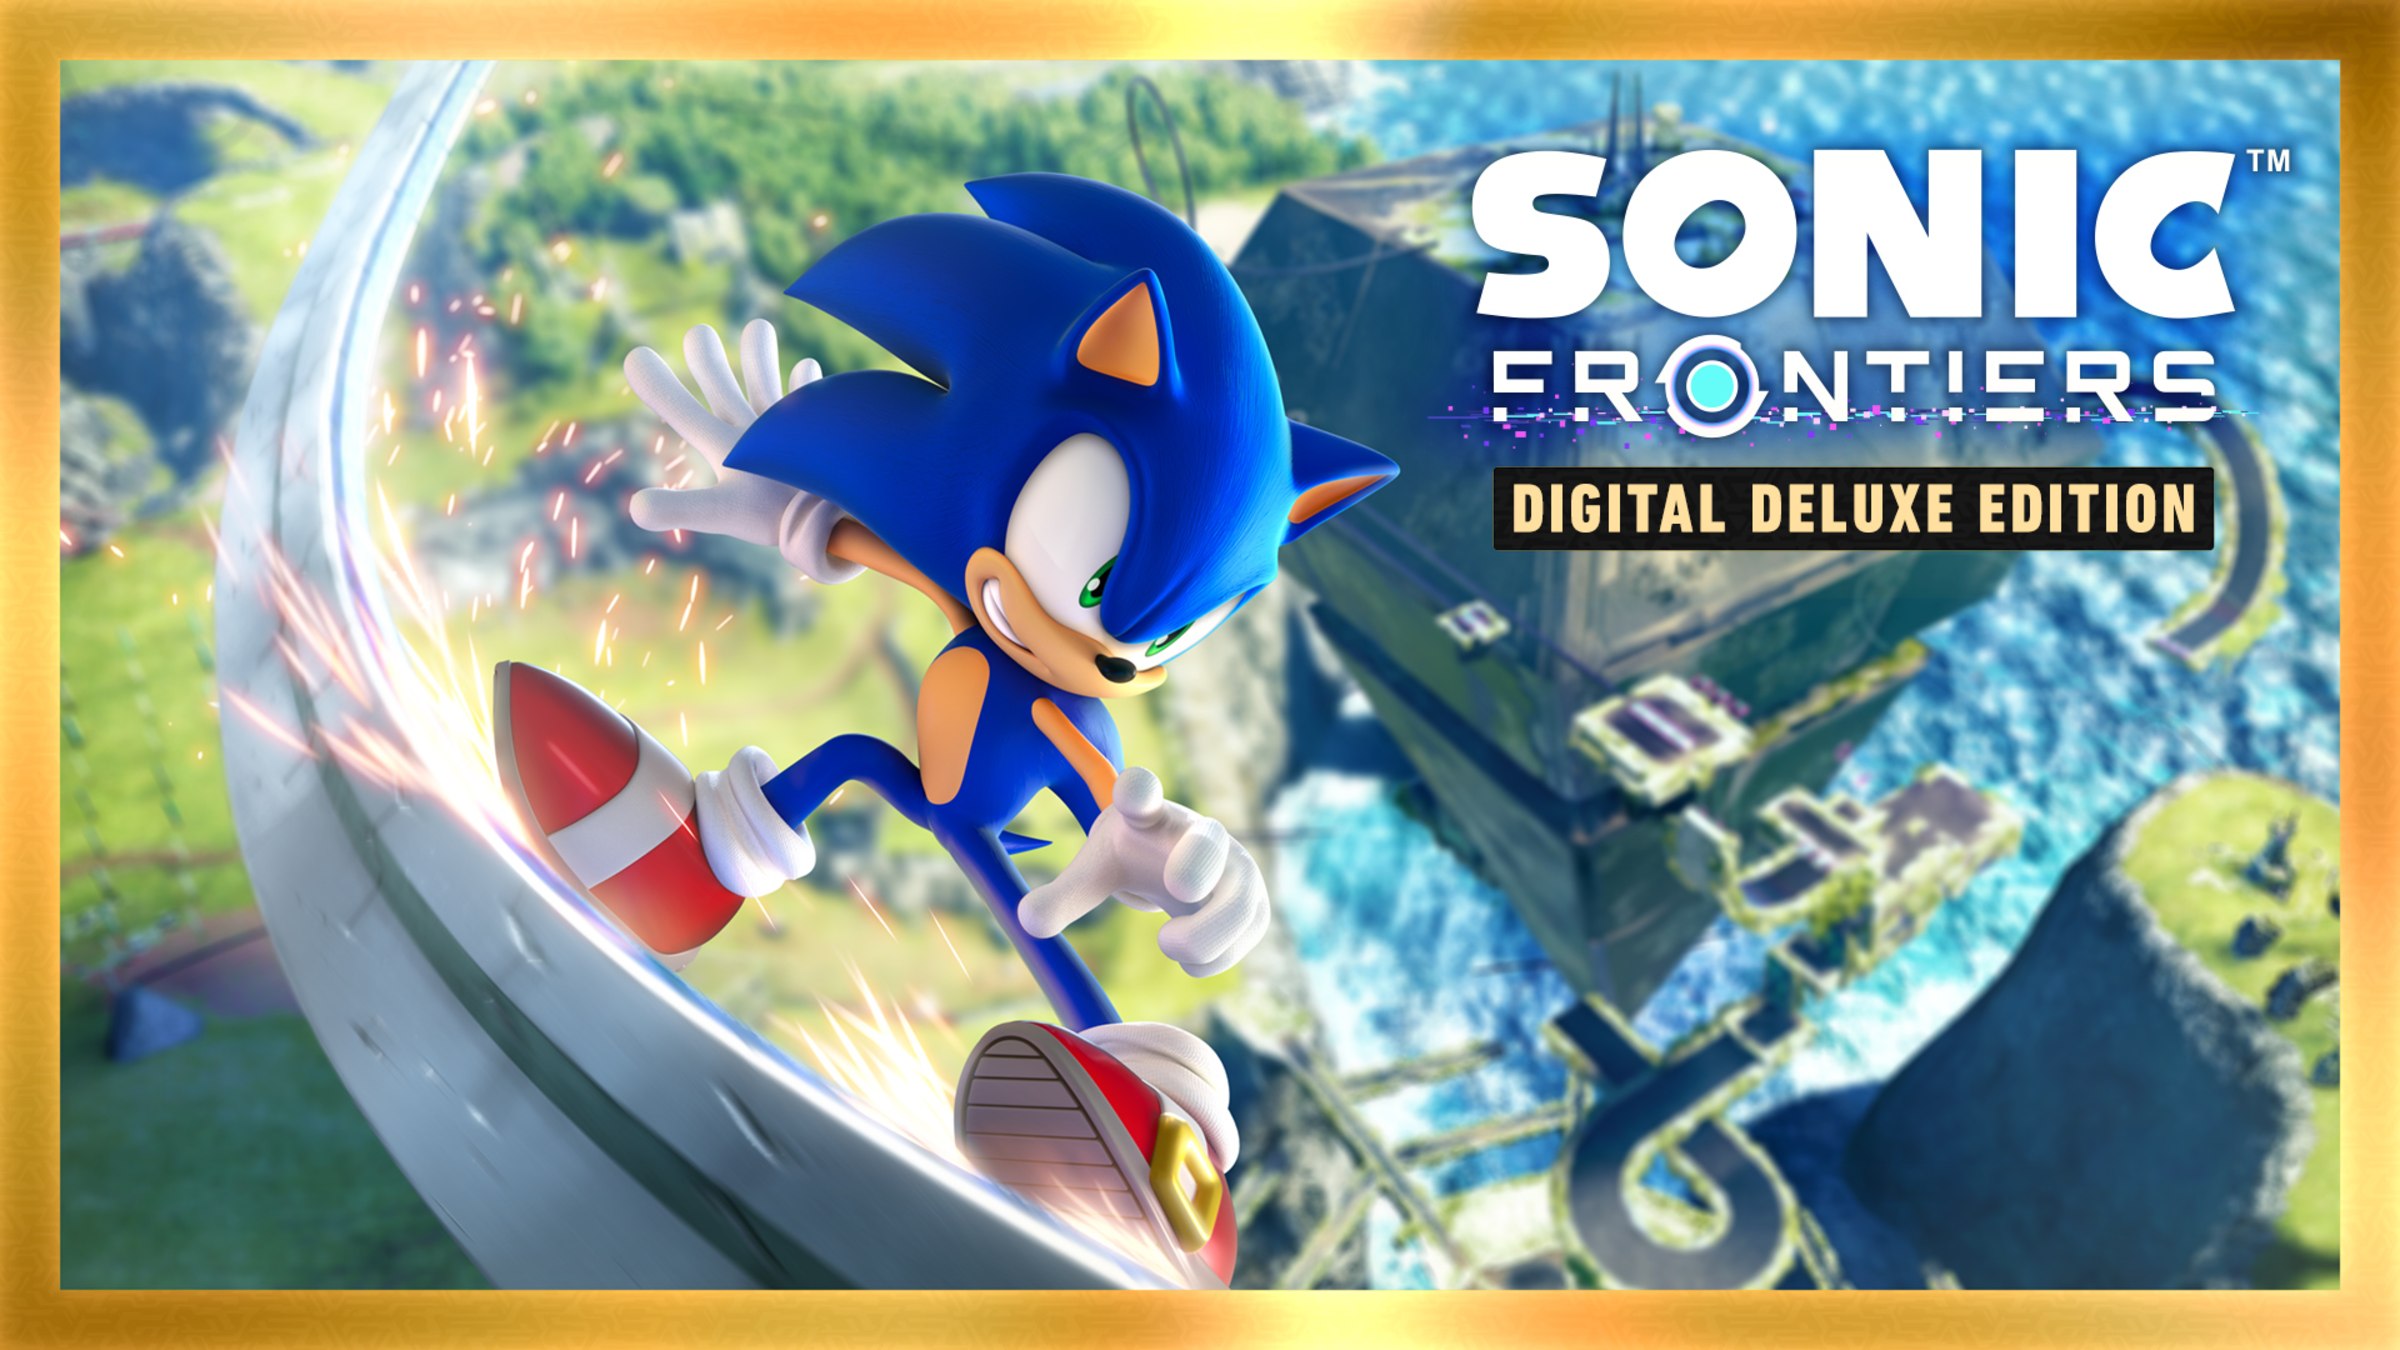 Some more news about the Sonic Superstars Digital Deluxe Content